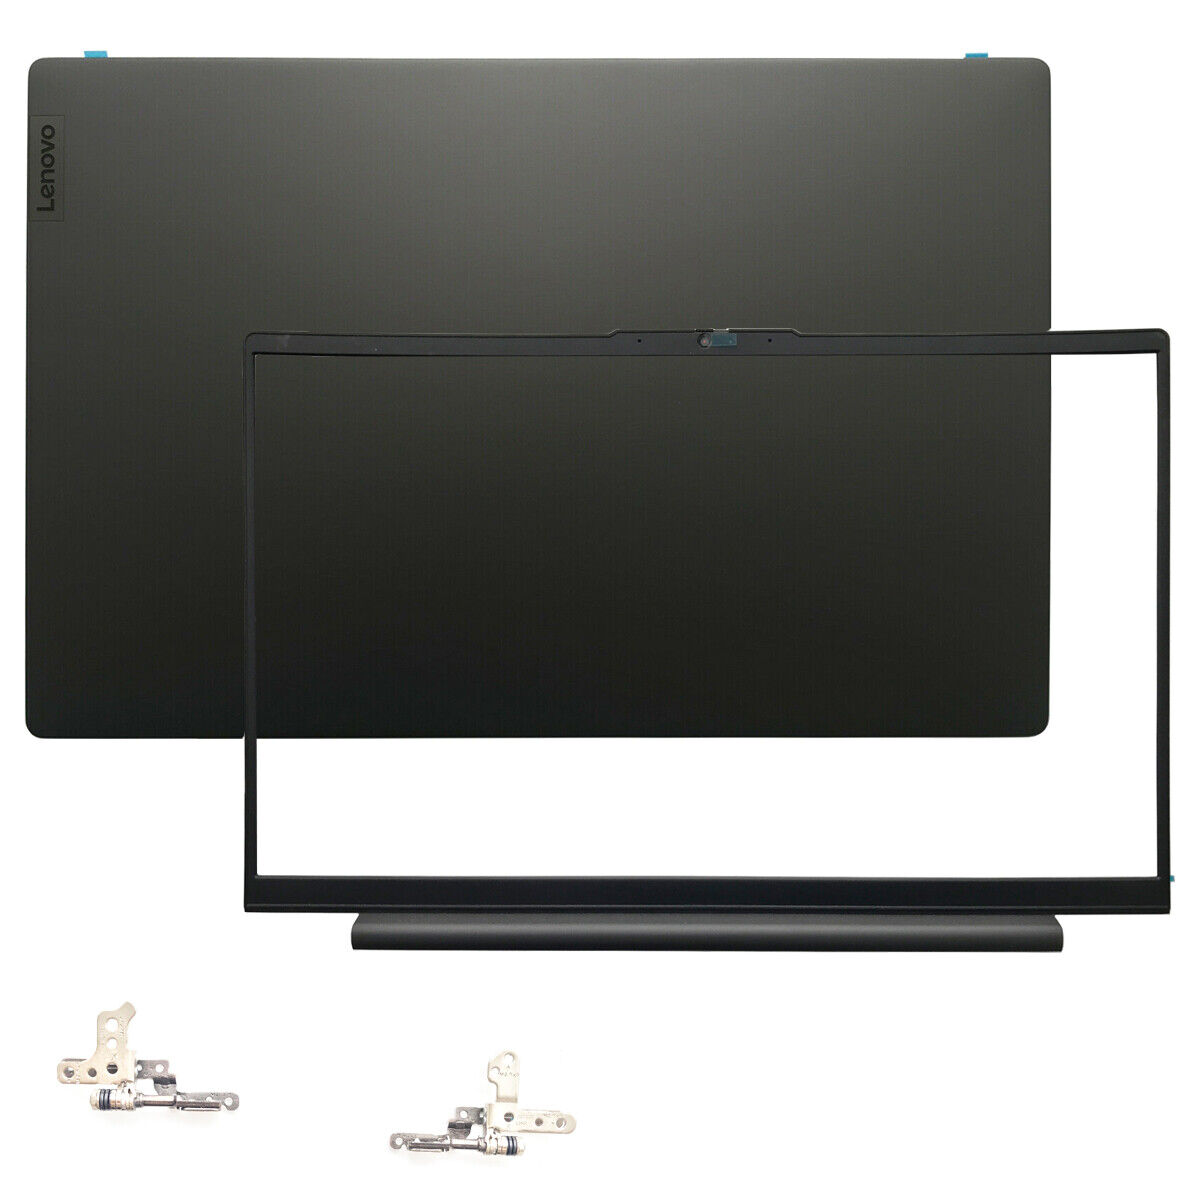 New For Lenovo ideapad 5 15IIL05 15ARE05 15ITL05  LCD Back Cover/Bezel/Hinges US